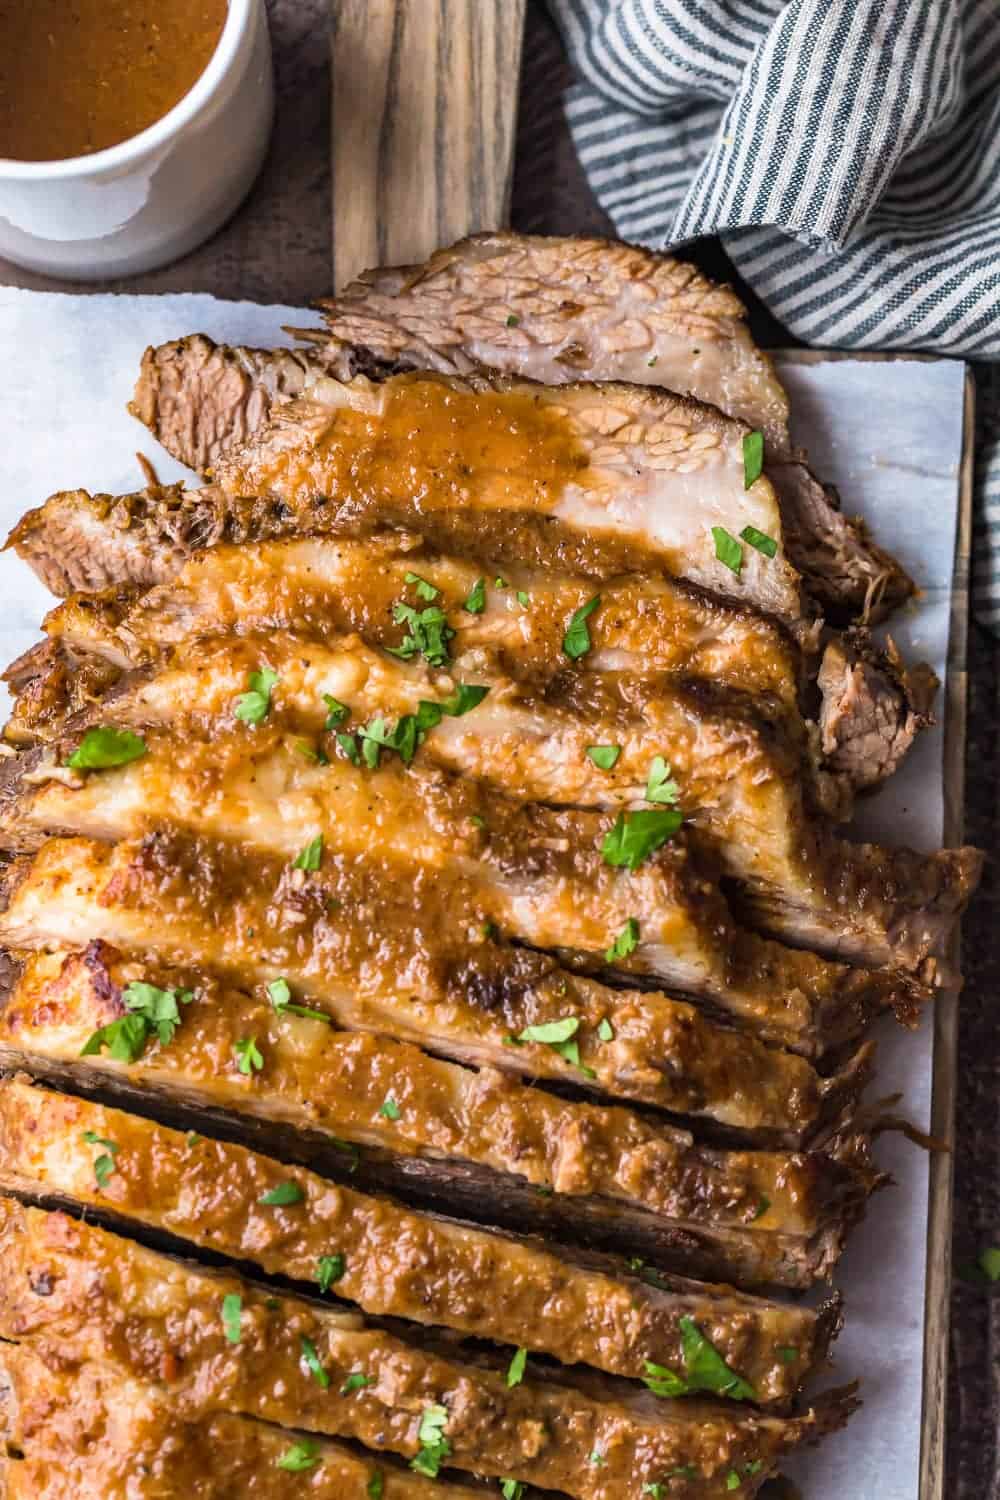 sweet and sour beef brisket cut into slices